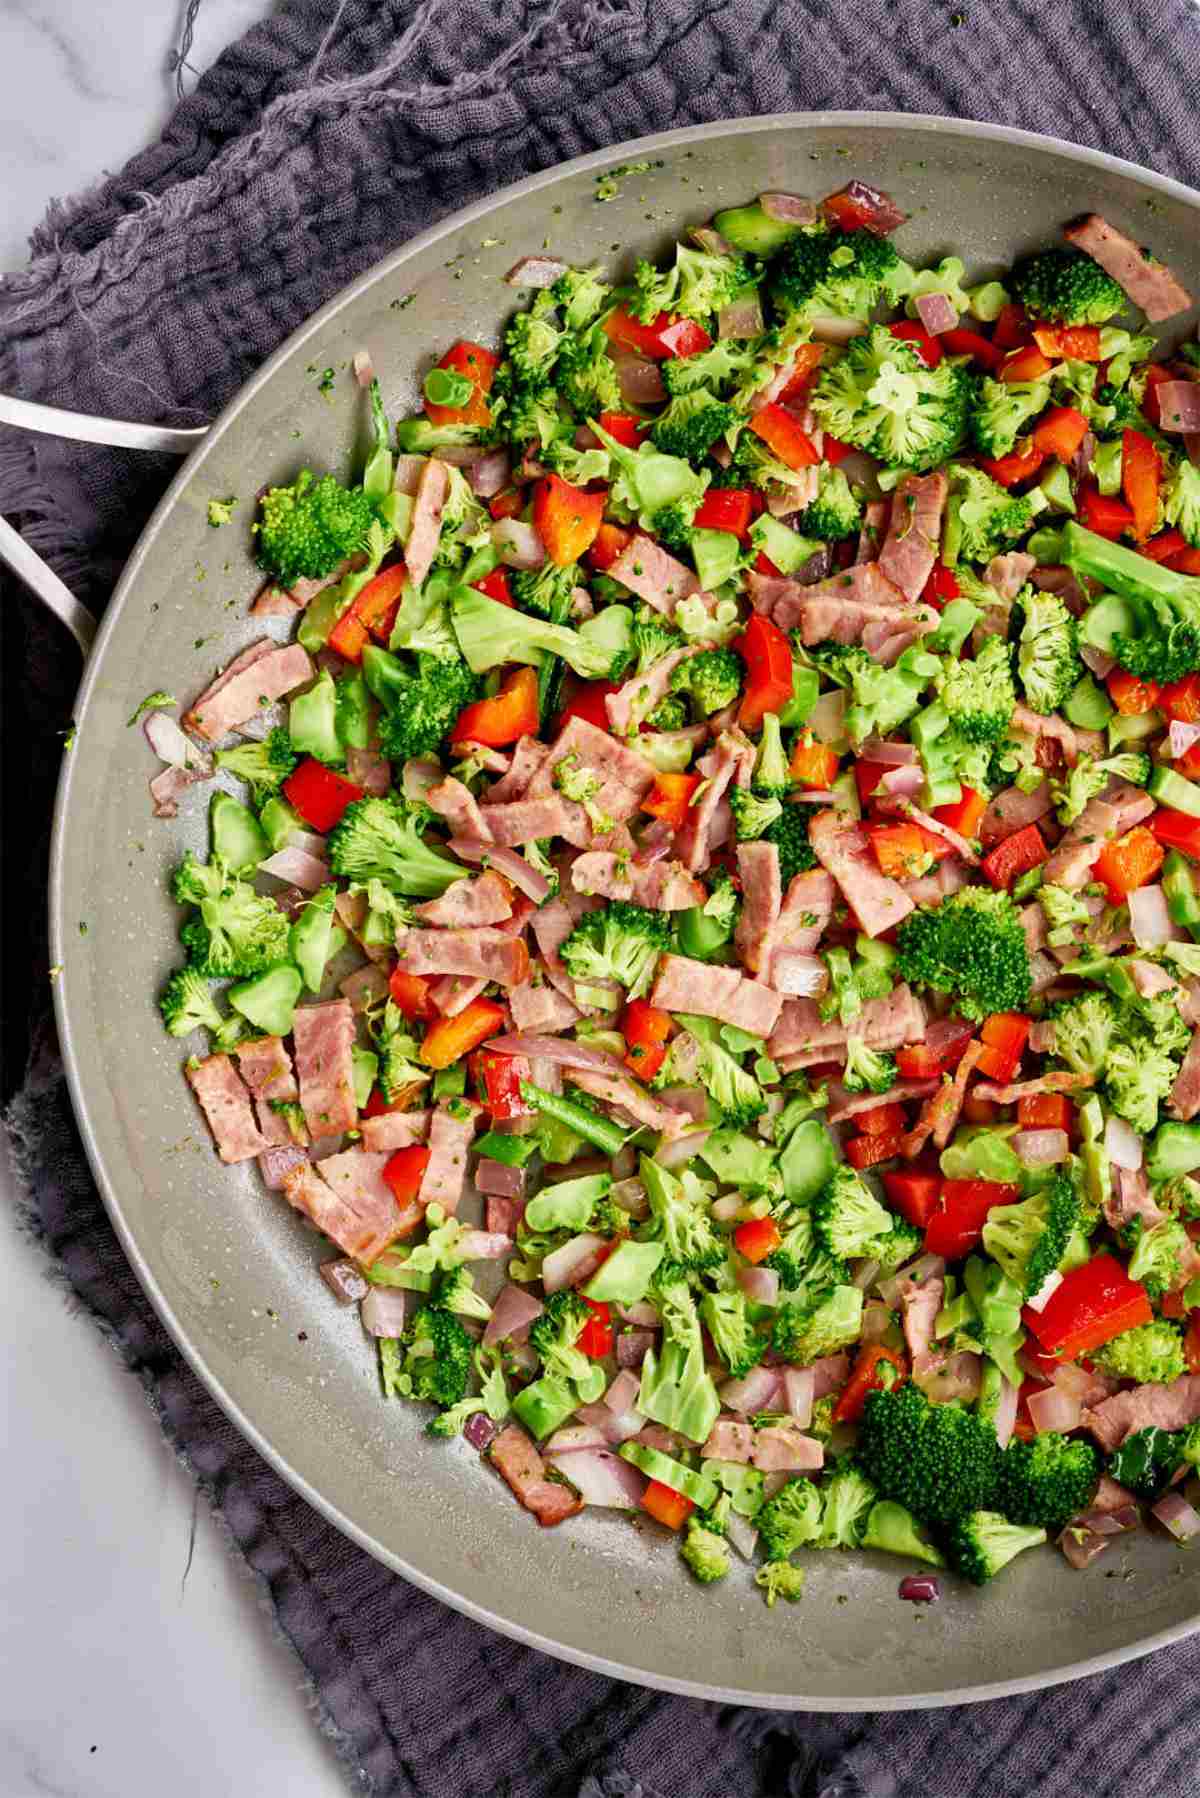 Vegetables and turkey bacon in a pan.